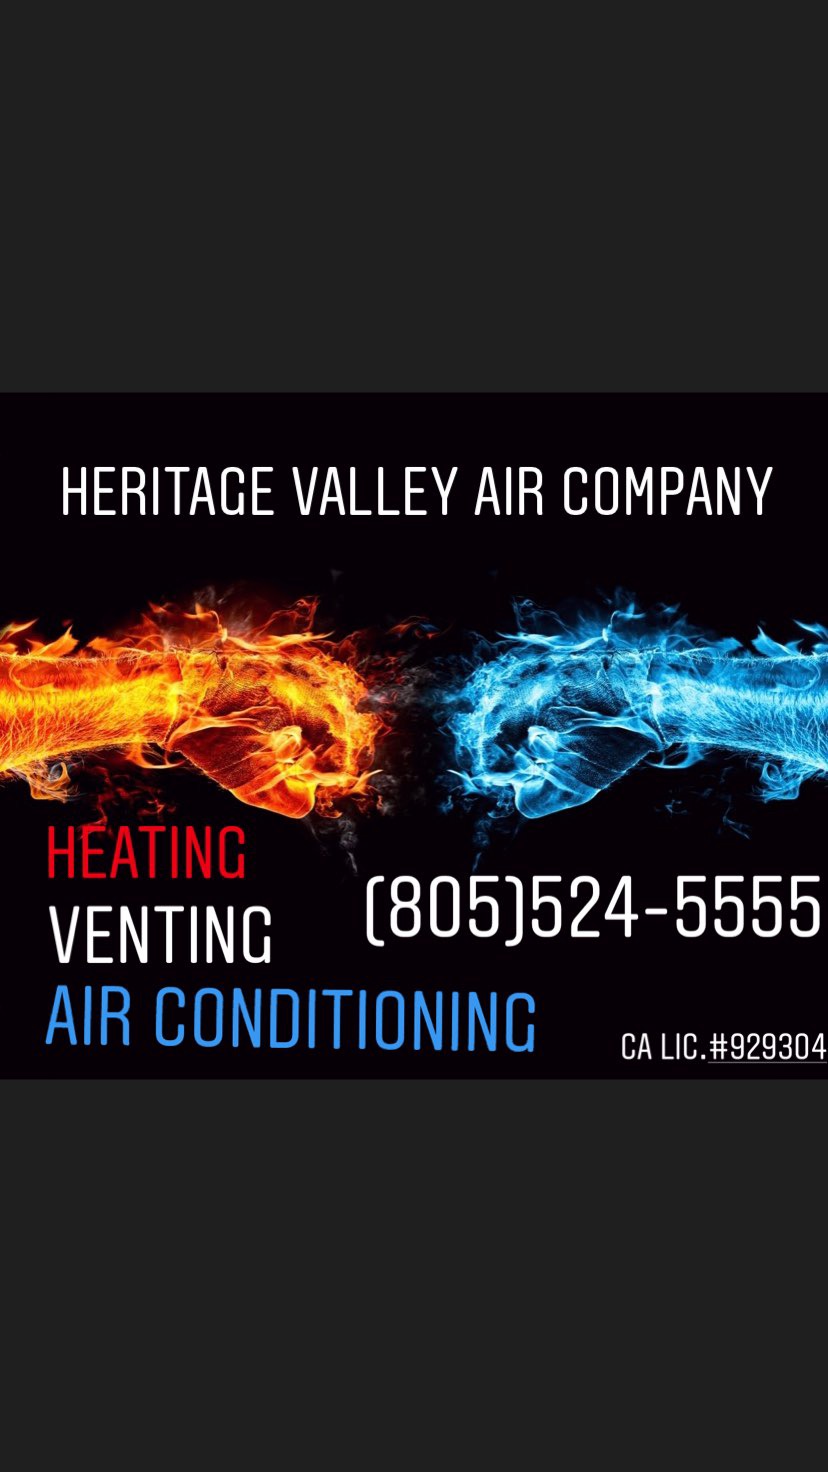 Heritage Valley Air Company